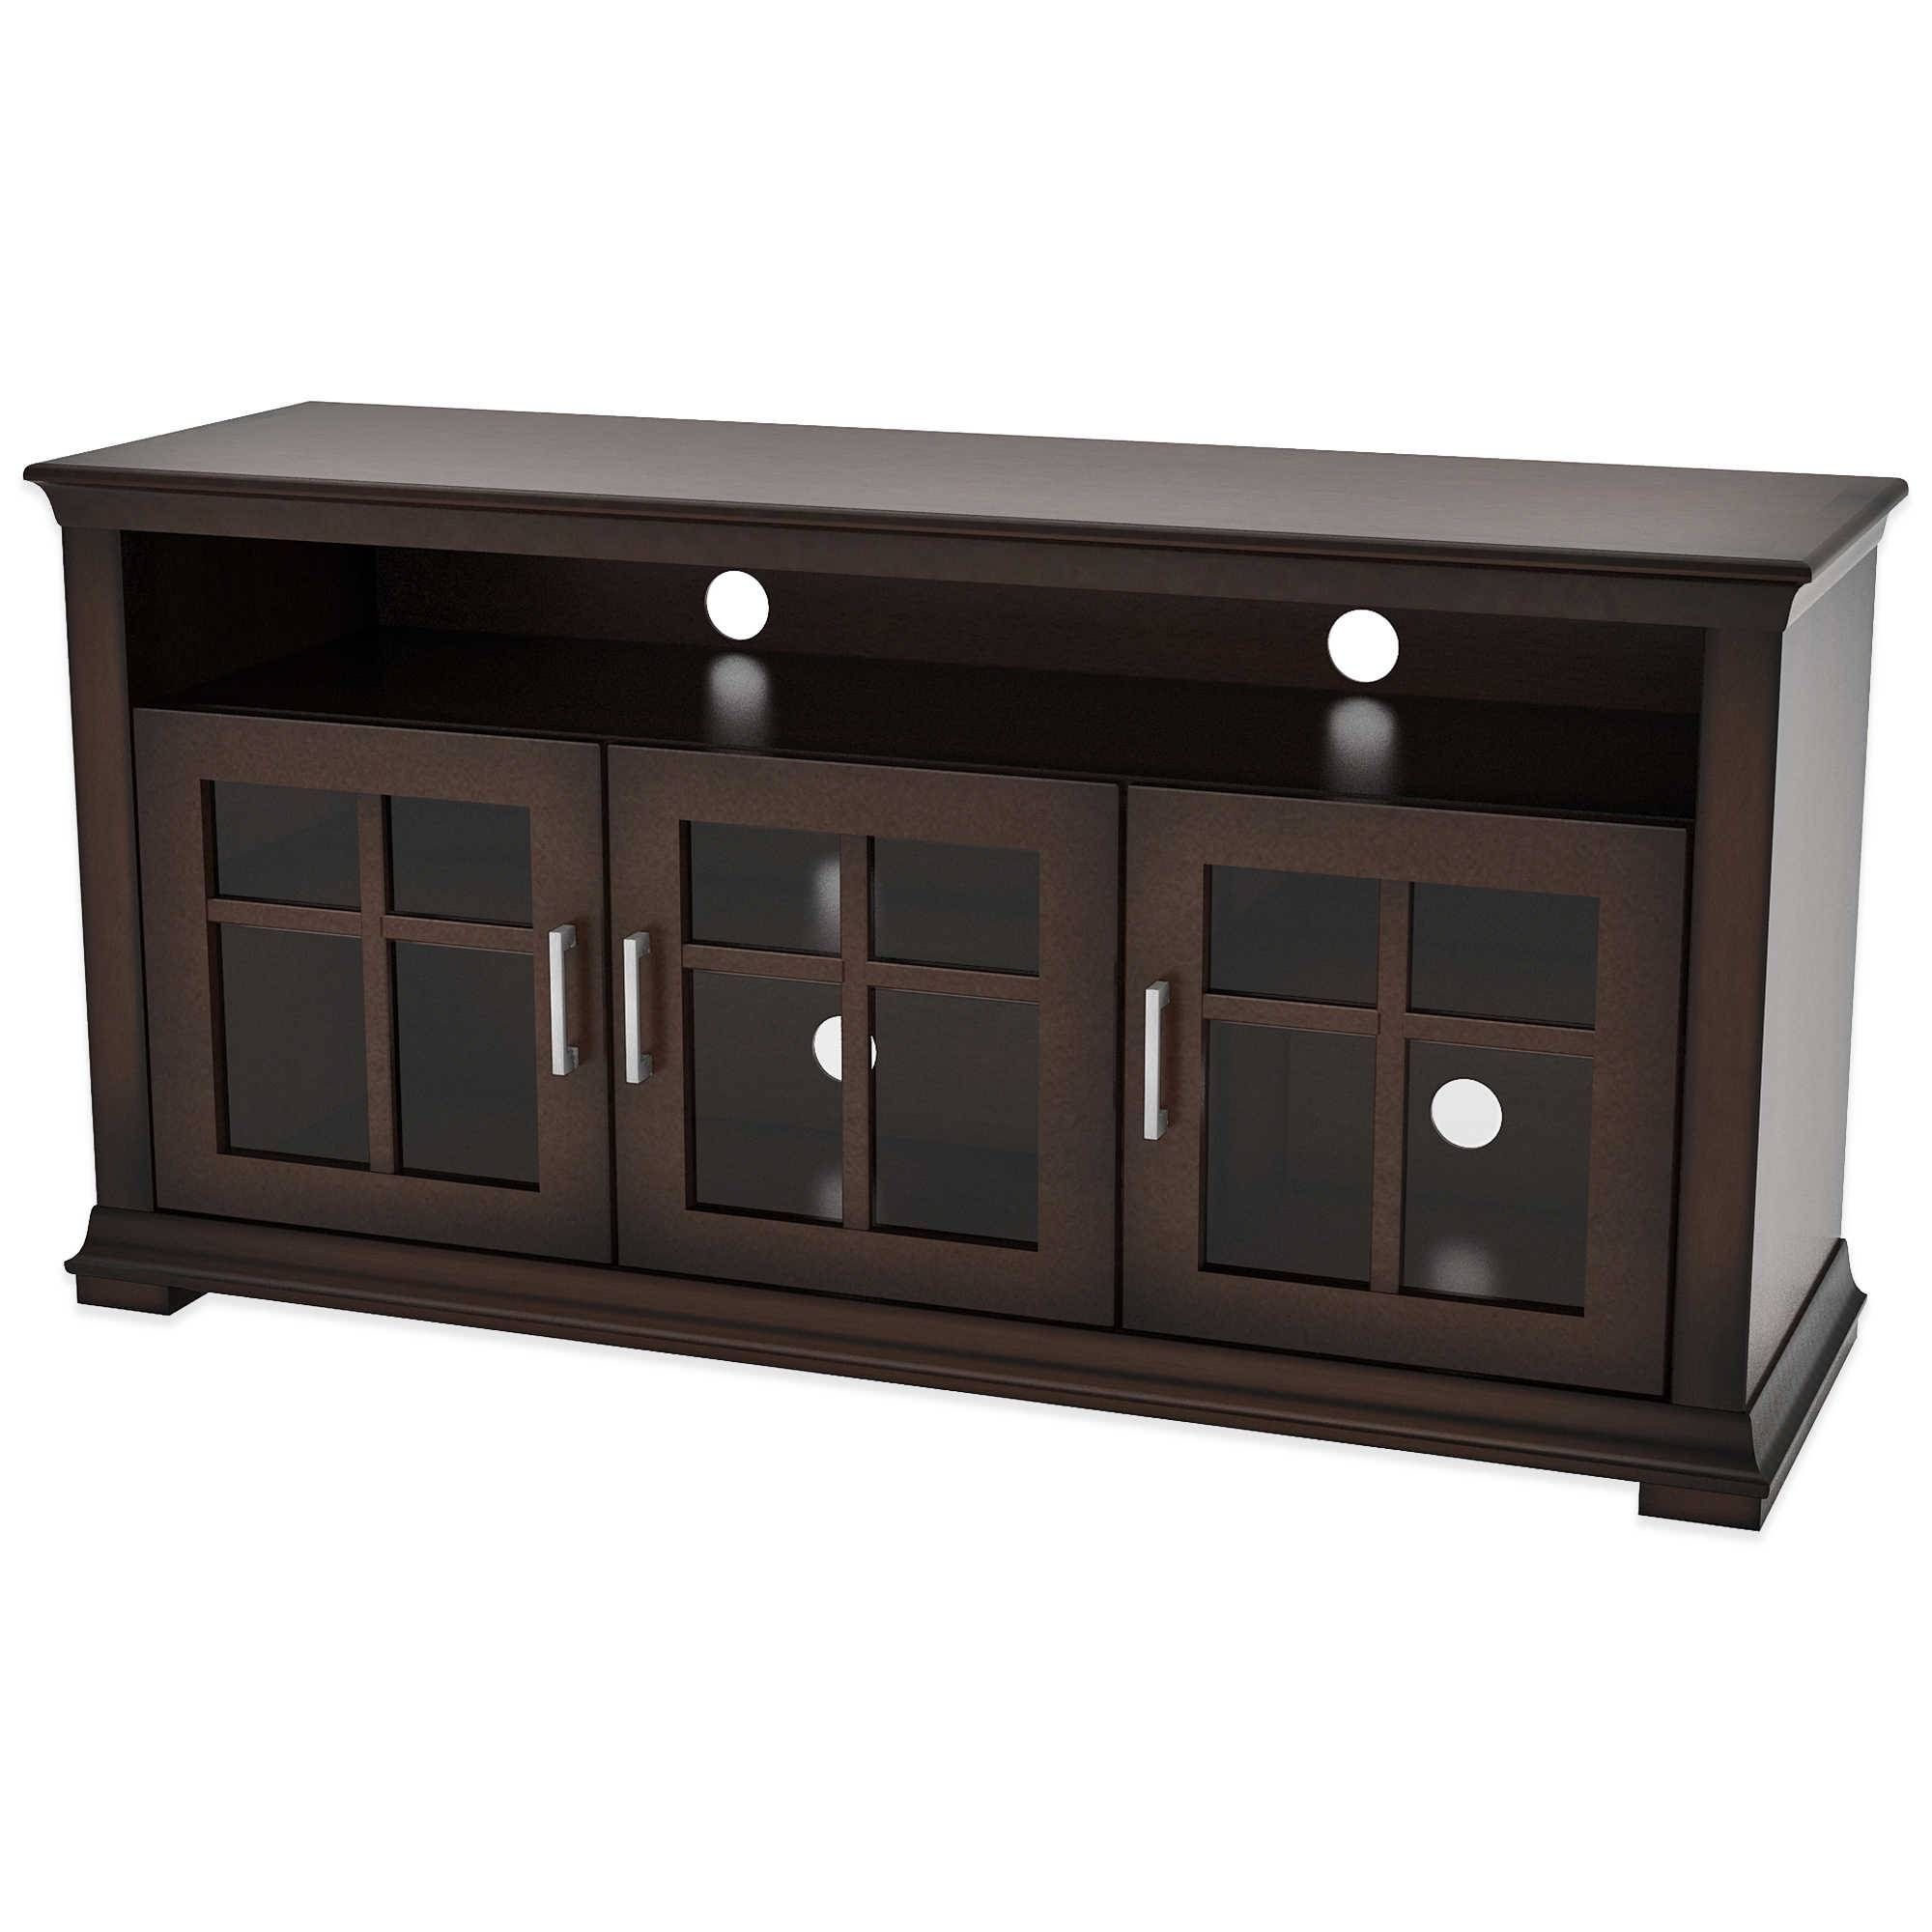 Short Espresso Wood Tv Stand With Triple Glass Doors And Open Regarding Dark Wood Tv Cabinets (View 2 of 15)